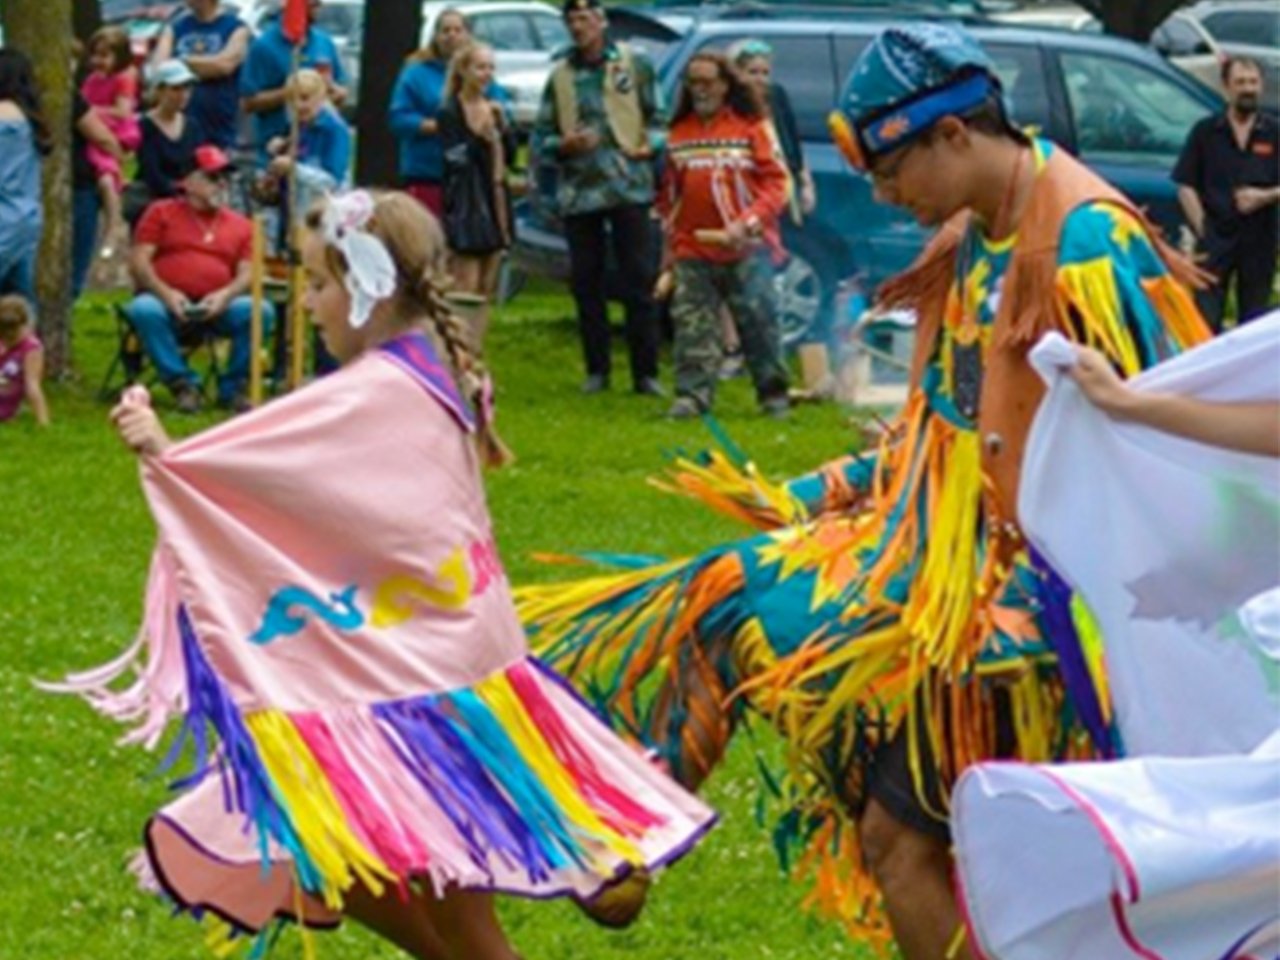 Stacey's Kids dancing at a powwow